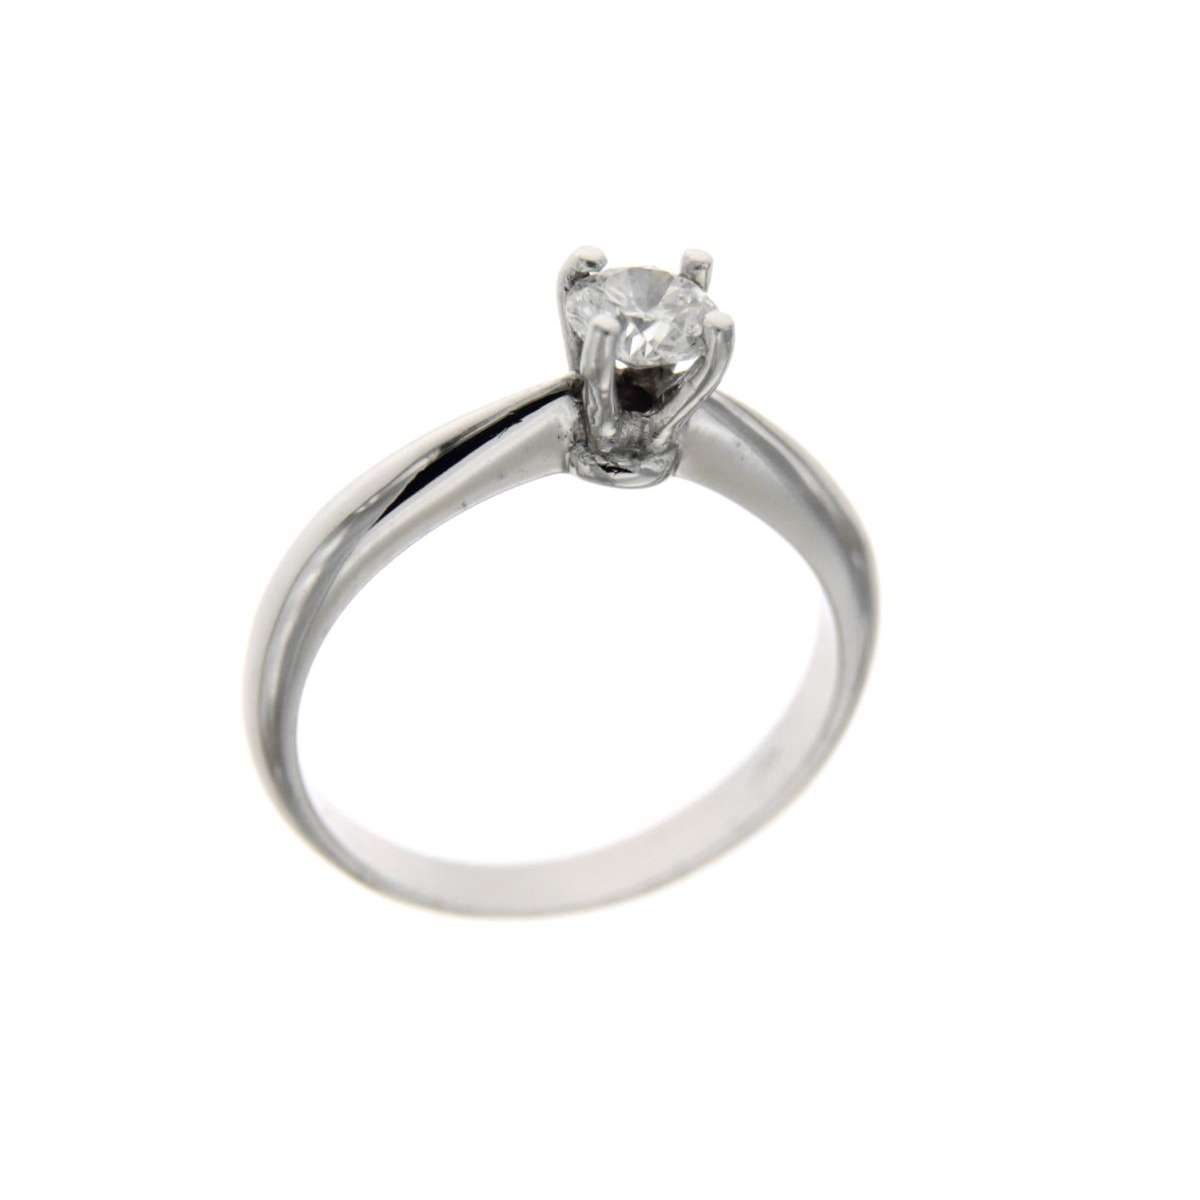 4-prong Solitaire Ring with GIA Certified 0.43 ct F-VS2 Diamond